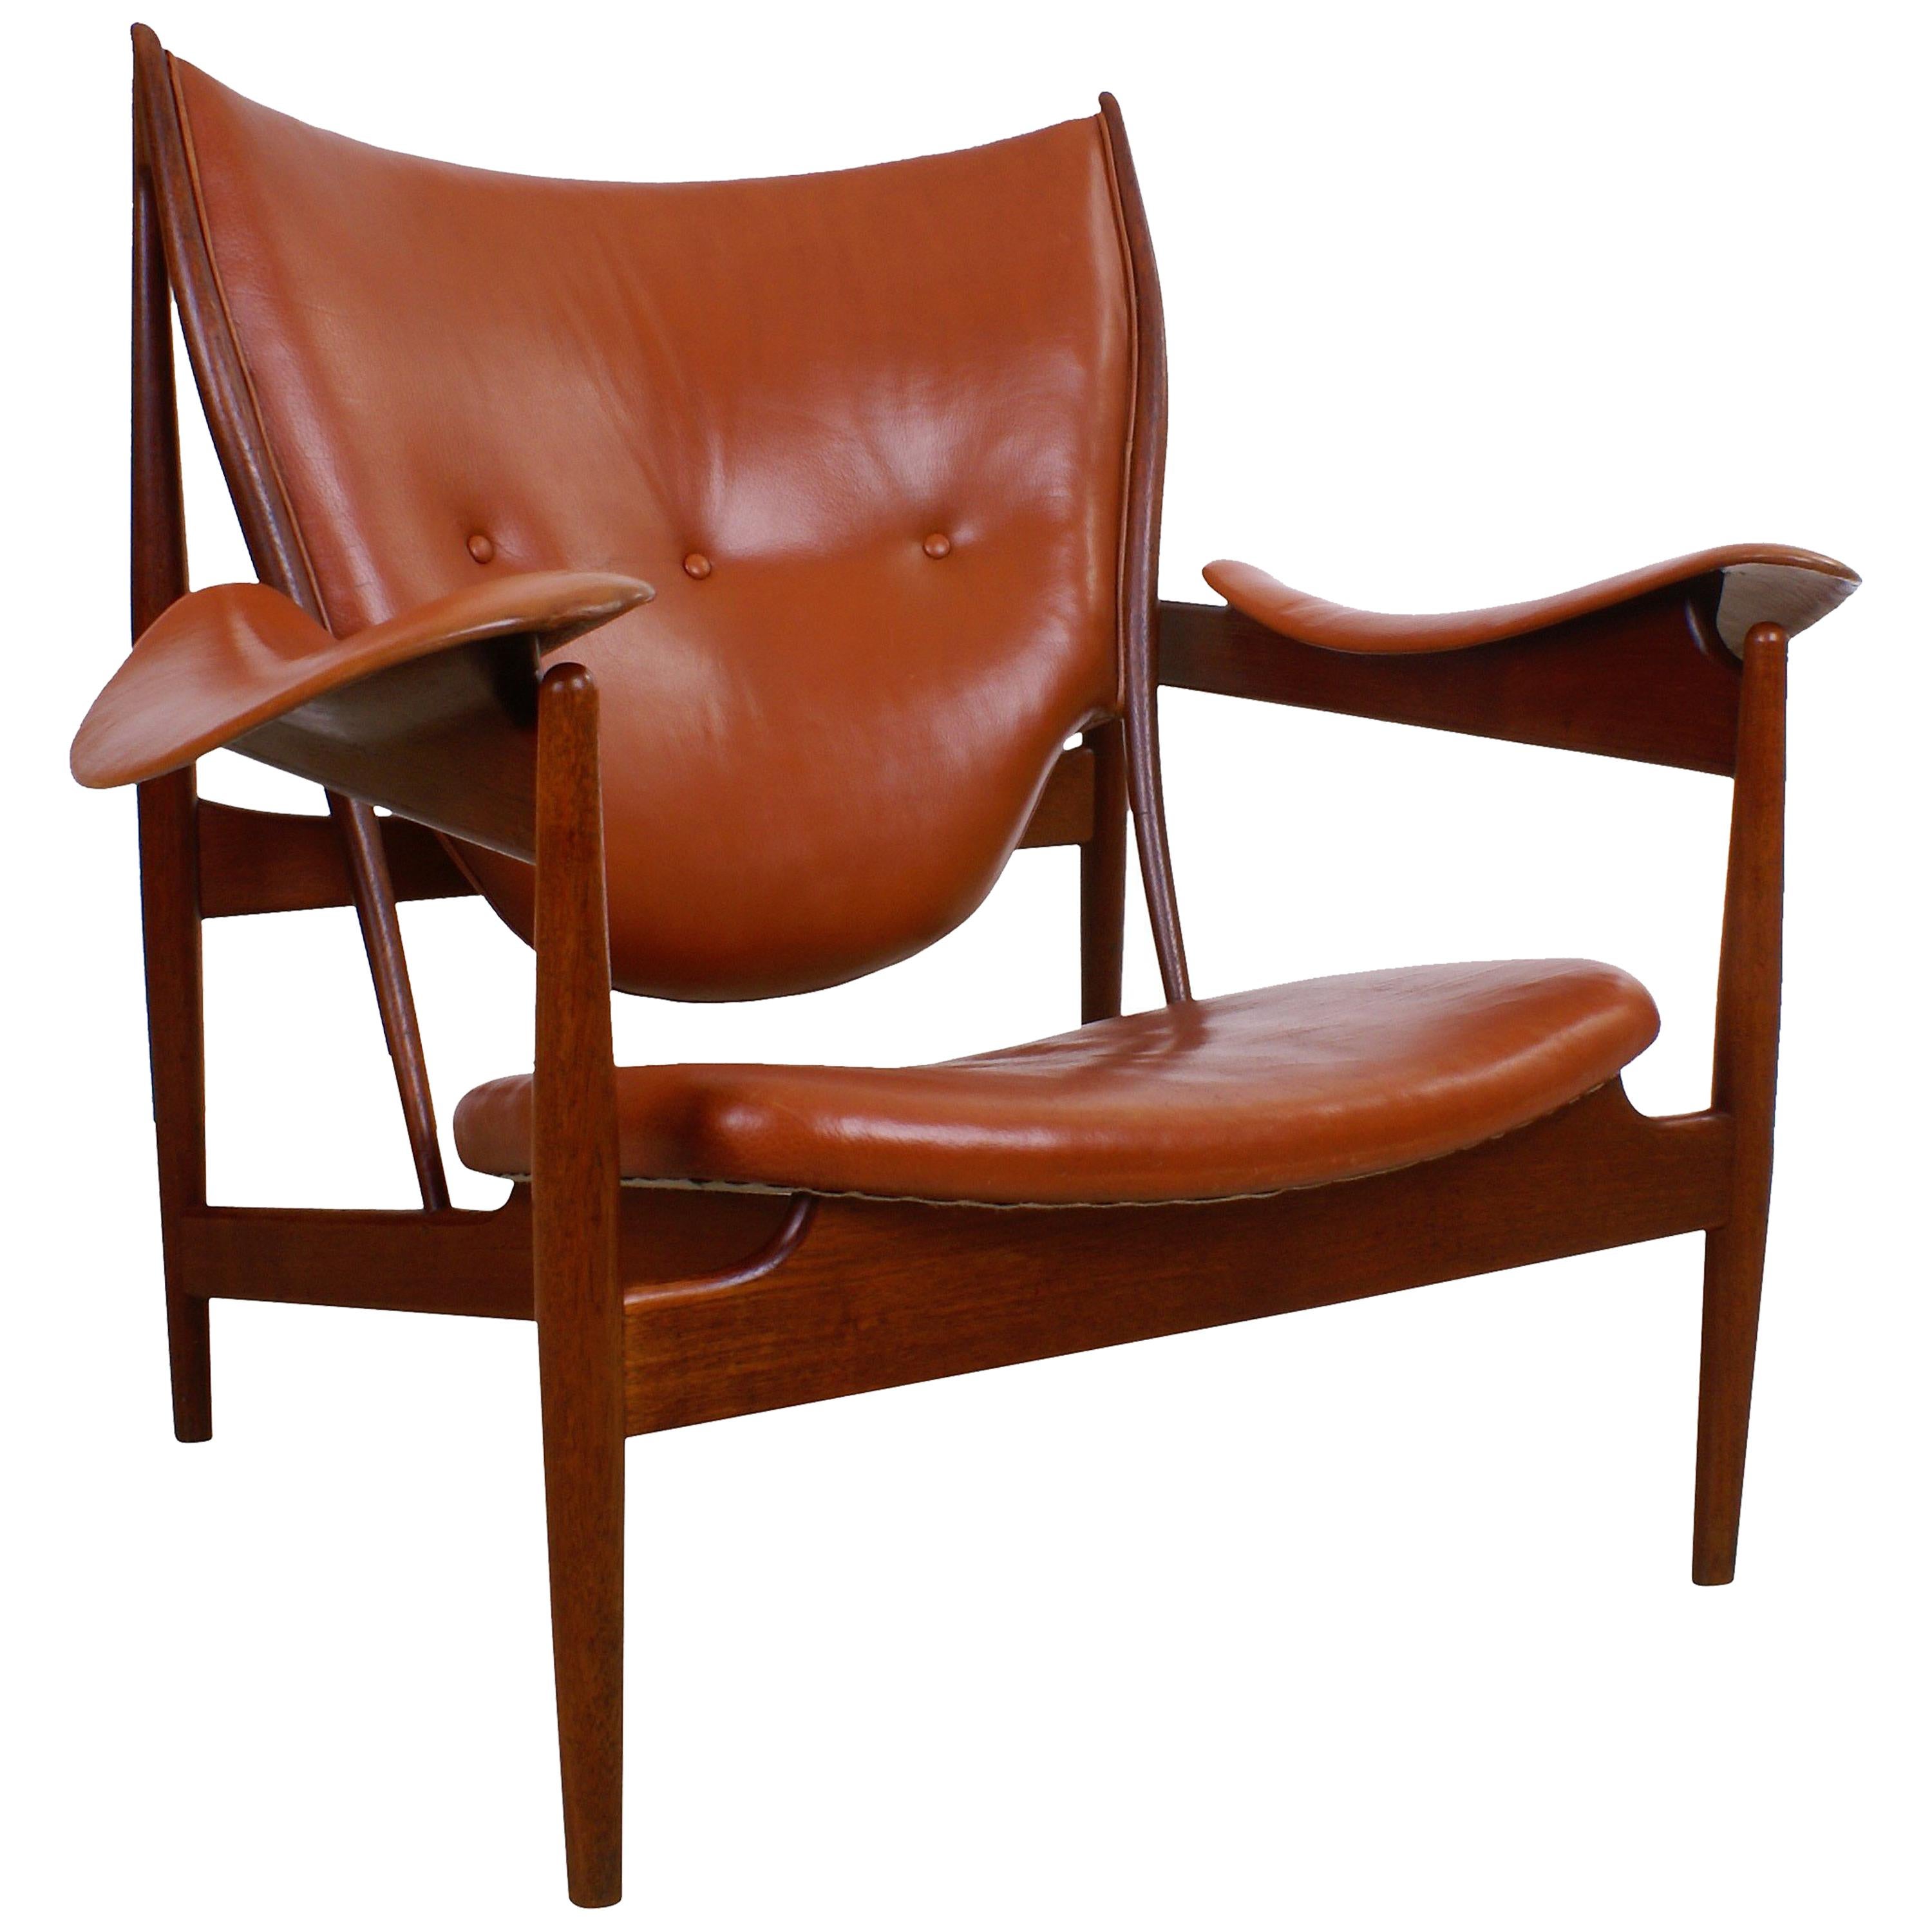 Finn Juhl Rare 'Chieftain' Chair in Teak and Leather for Niels Vodder, 1949 For Sale